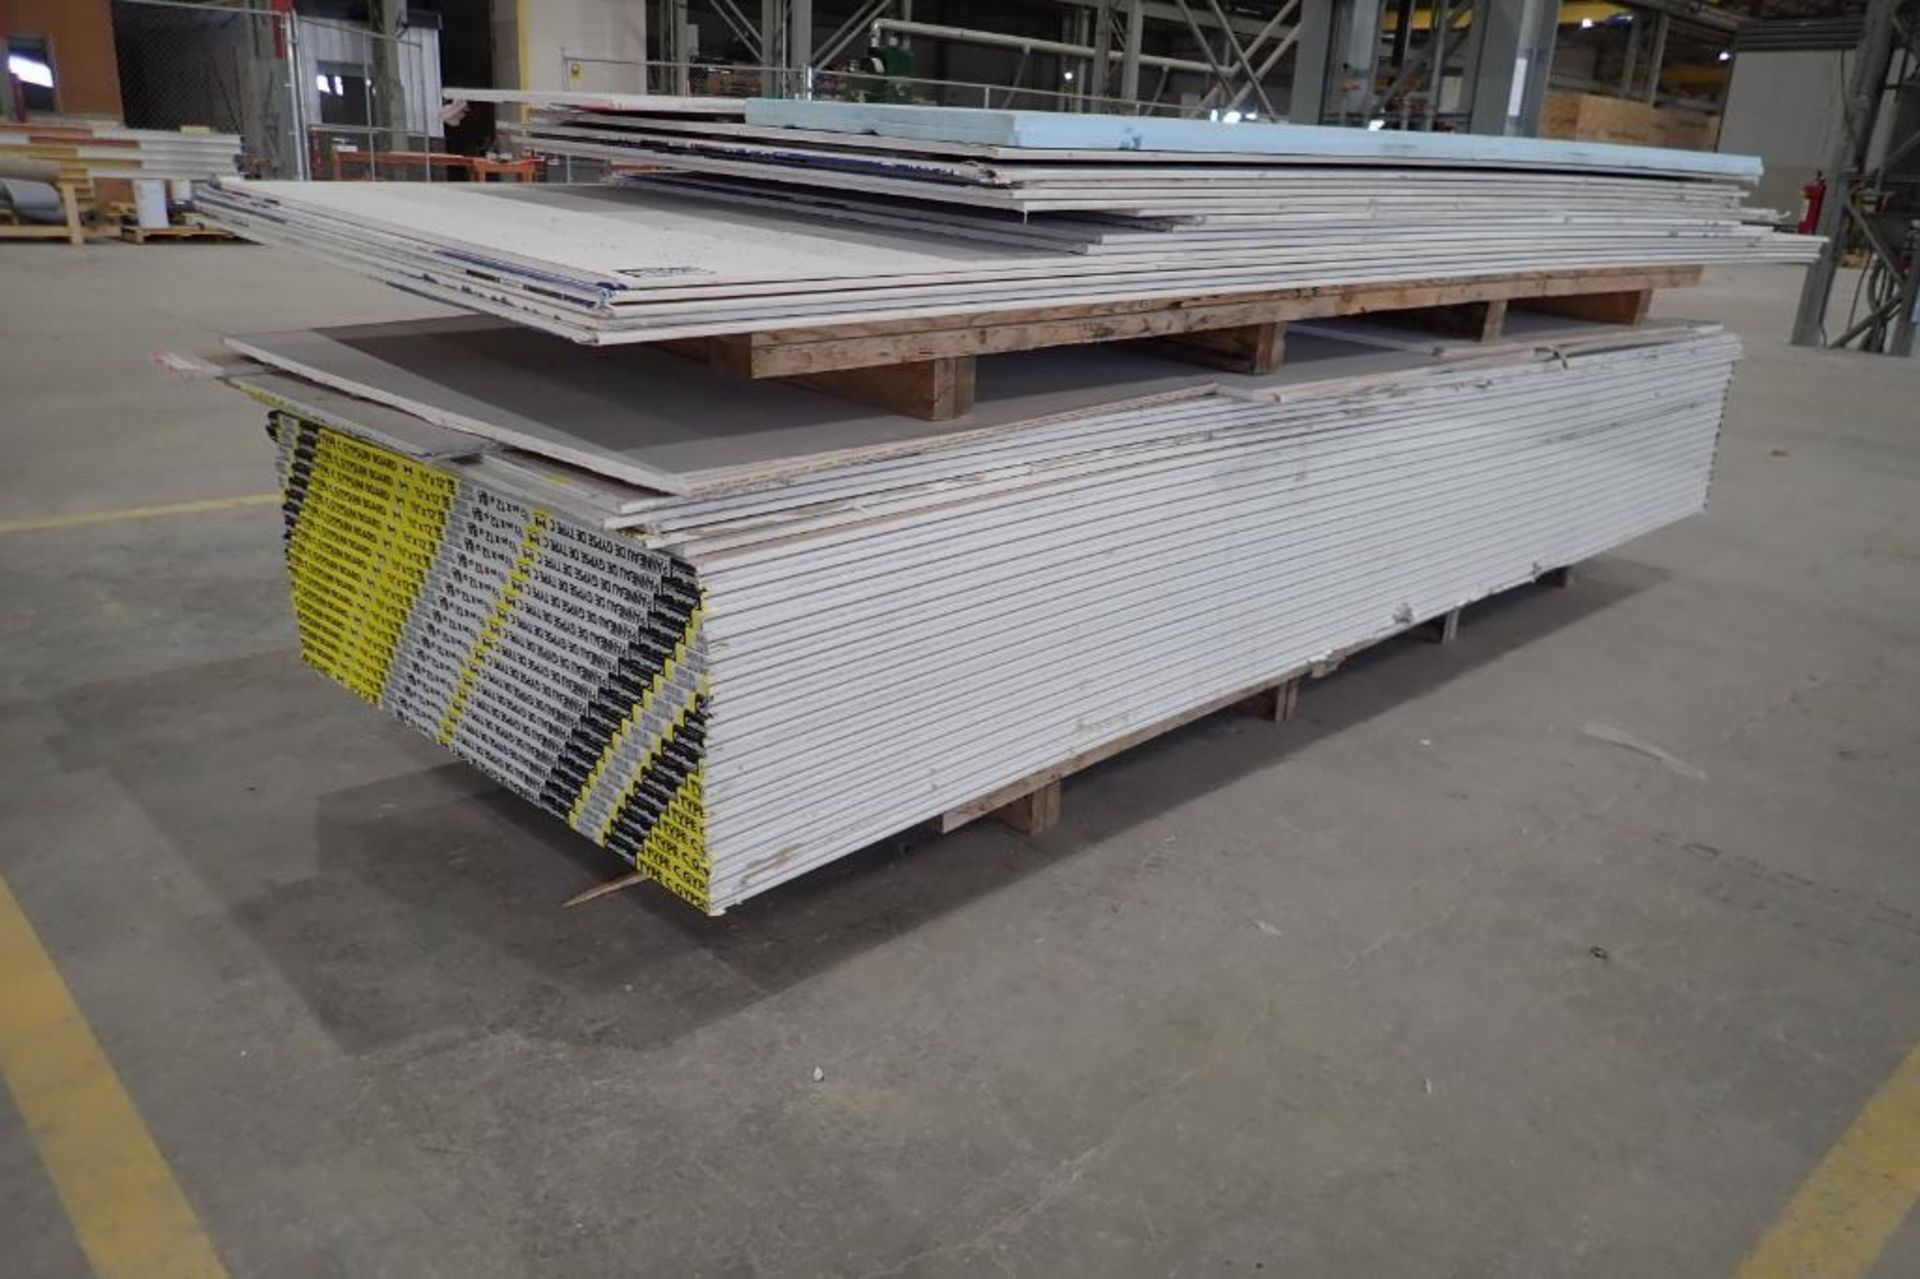 Lot of Approx. 44pcs 1/2"x4'x12' CertainTeed Type C Gypsum Board, Partial Sheets, etc.